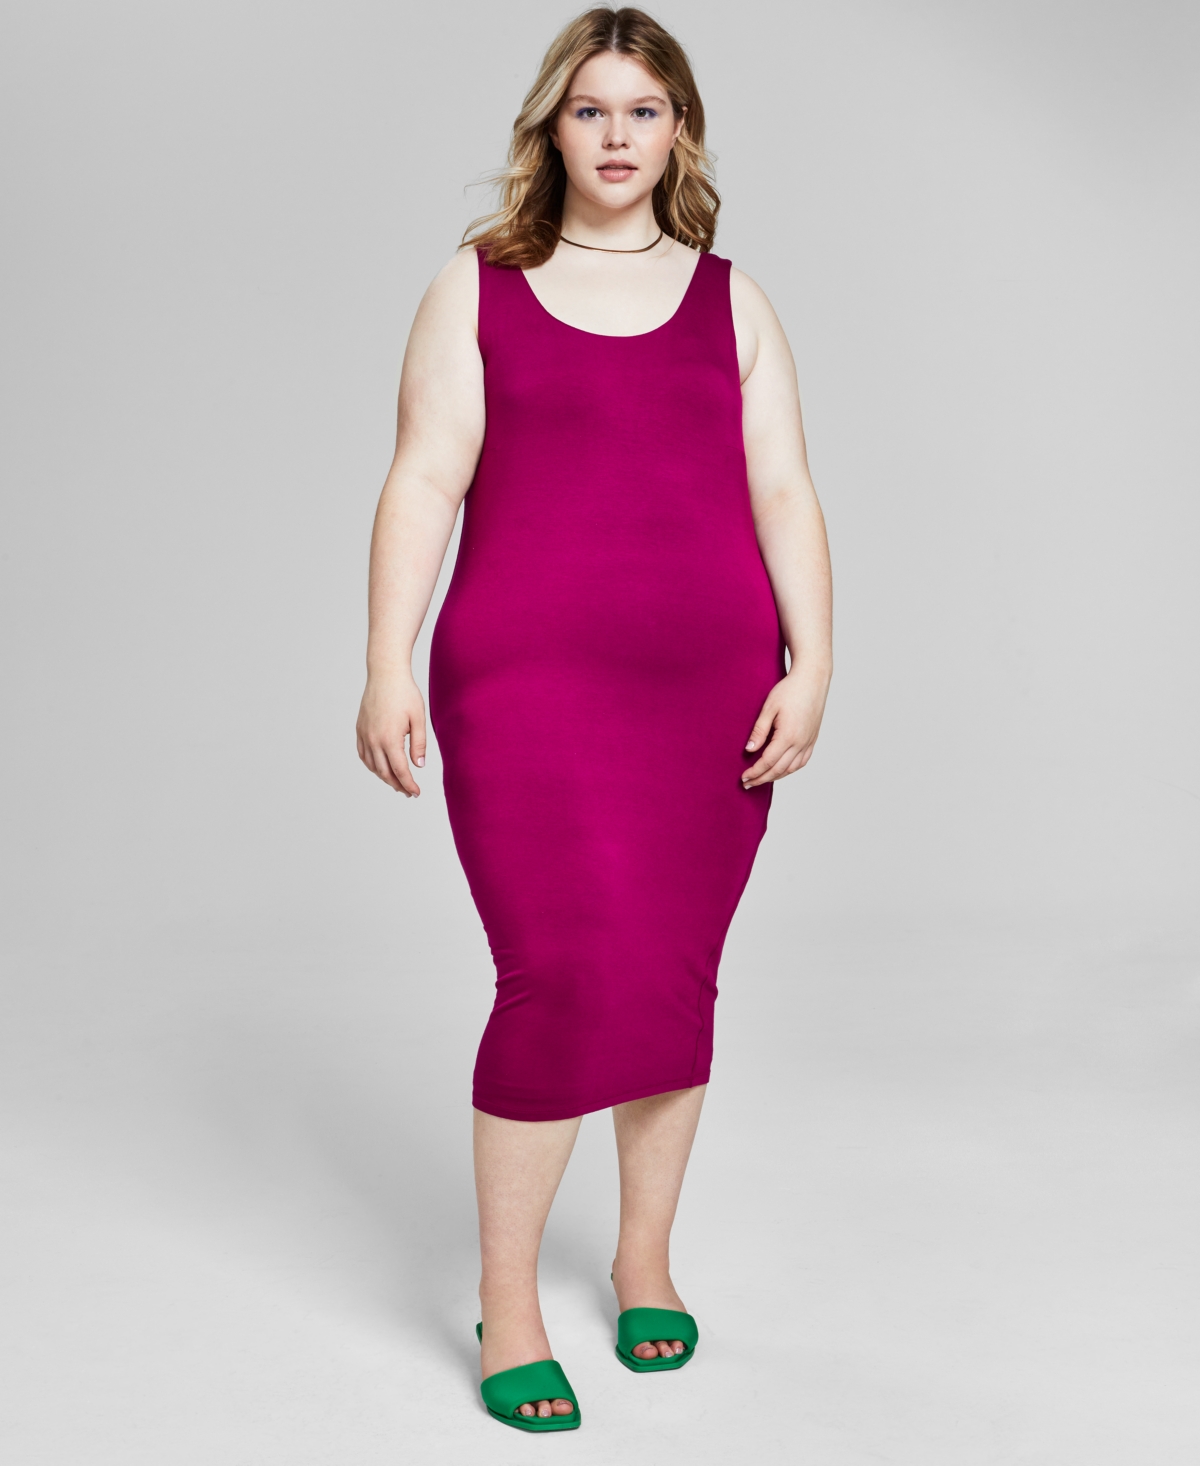 Bar Iii Trendy Plus Size Sleeveless Bodycon Midi Dress, Created For Macy's In Vivid Orchid